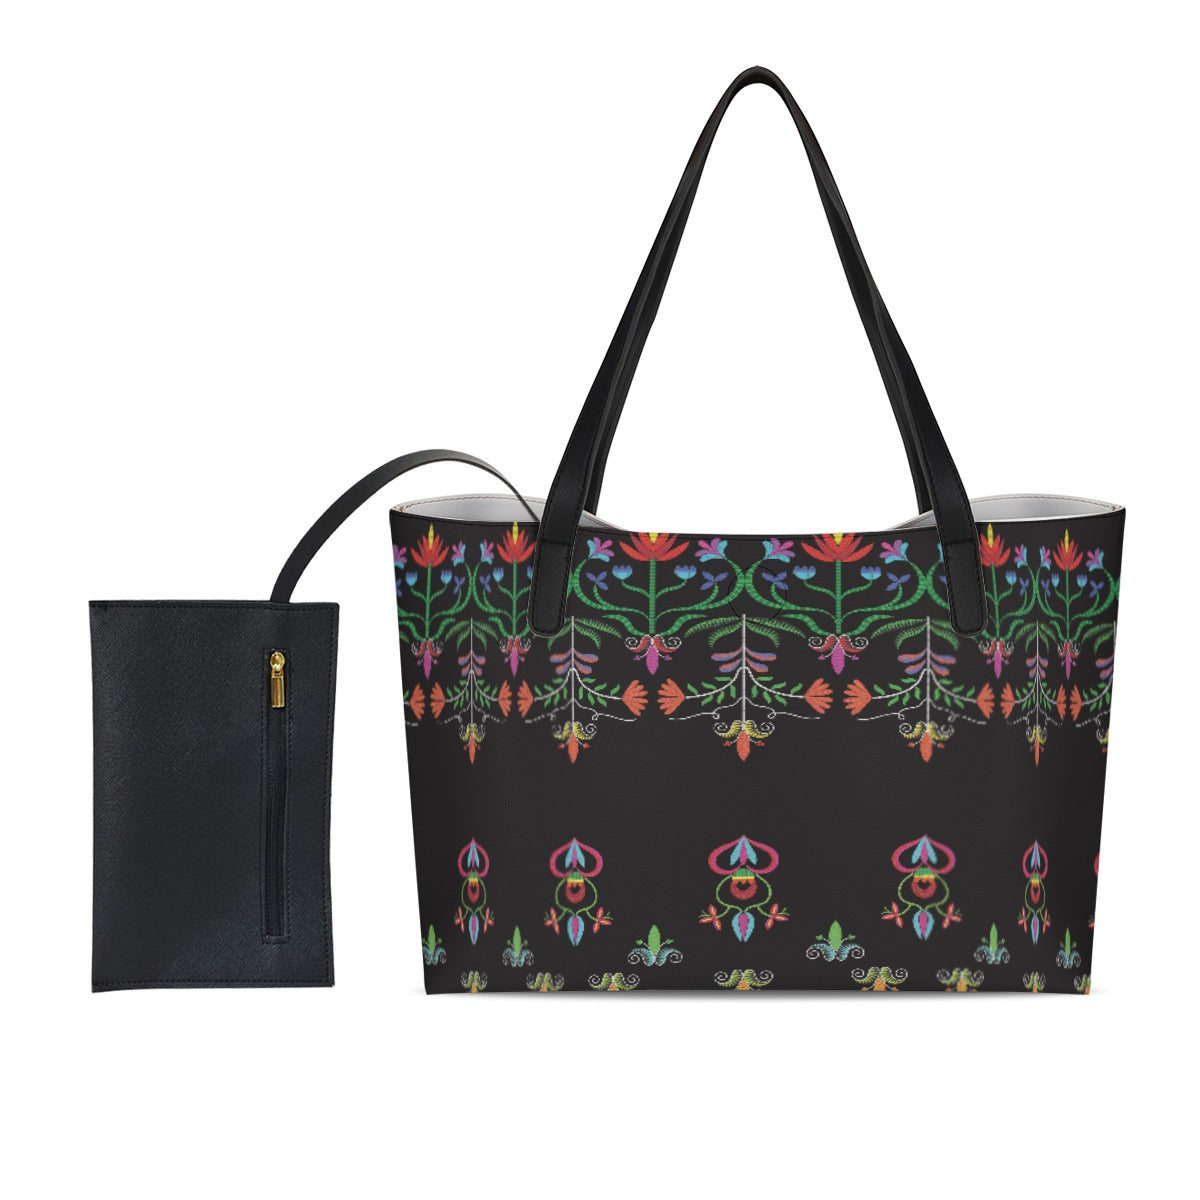 Metis Corn Mother Shopping Tote Bag With Black Mini Purse